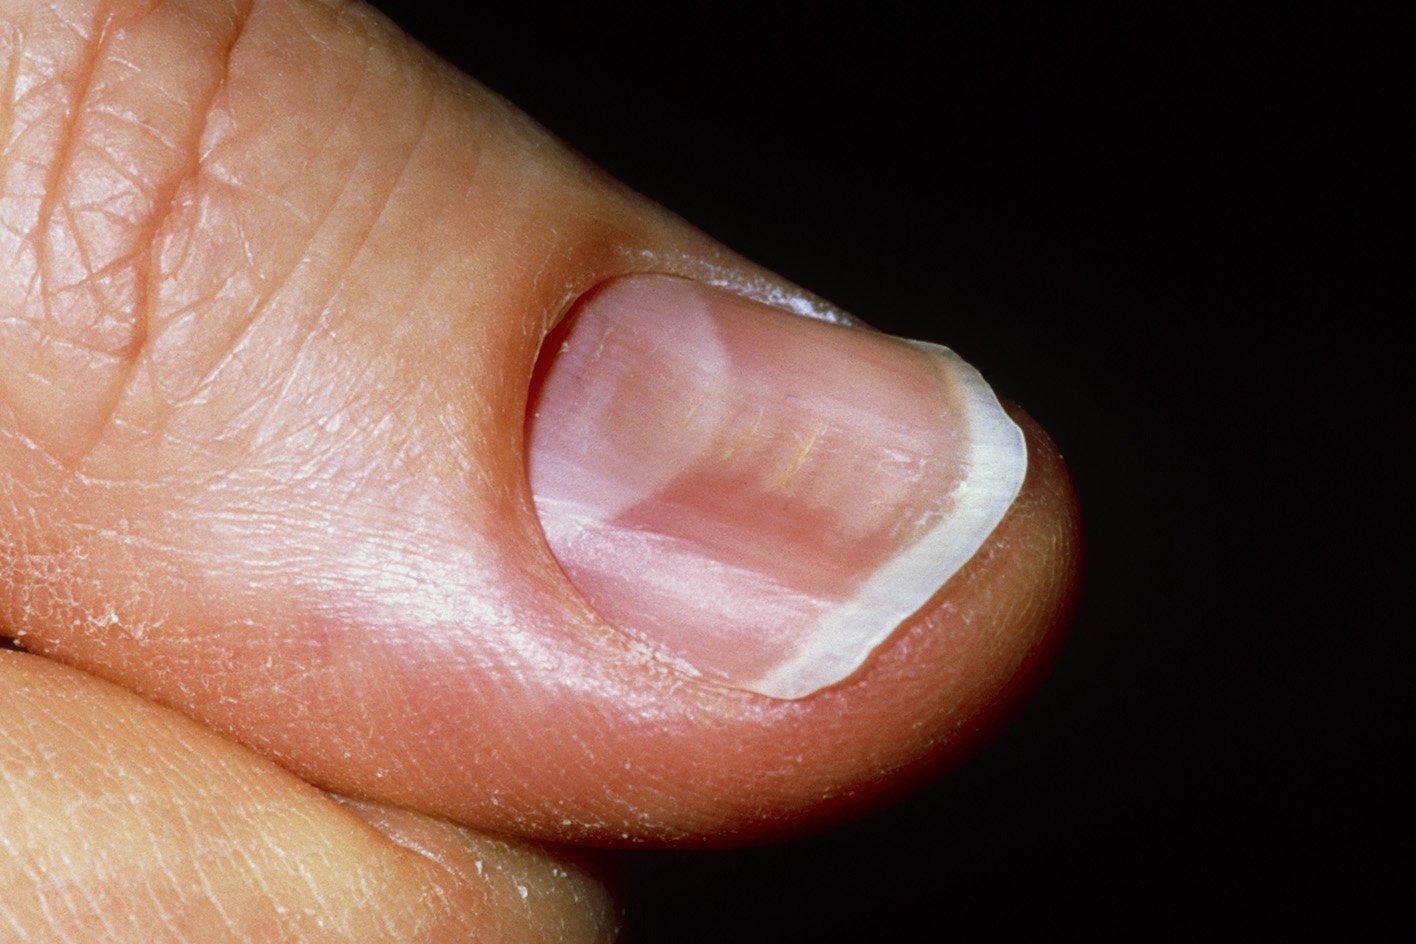 Darkening of the nail bed due to vitamin deficiency - wide 8